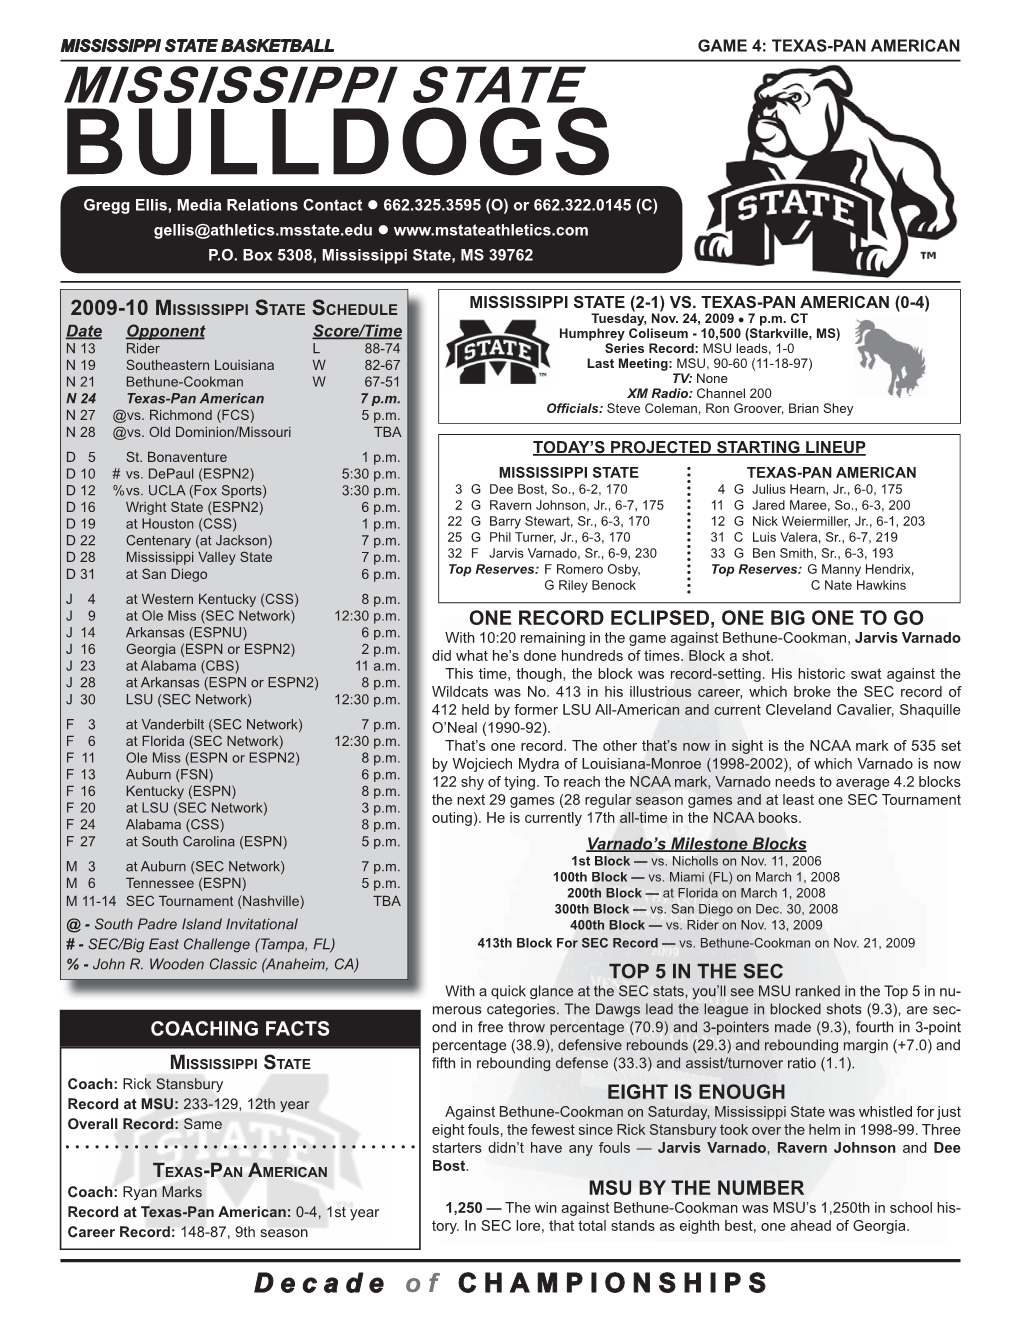 UTPA Game Notes.Indd